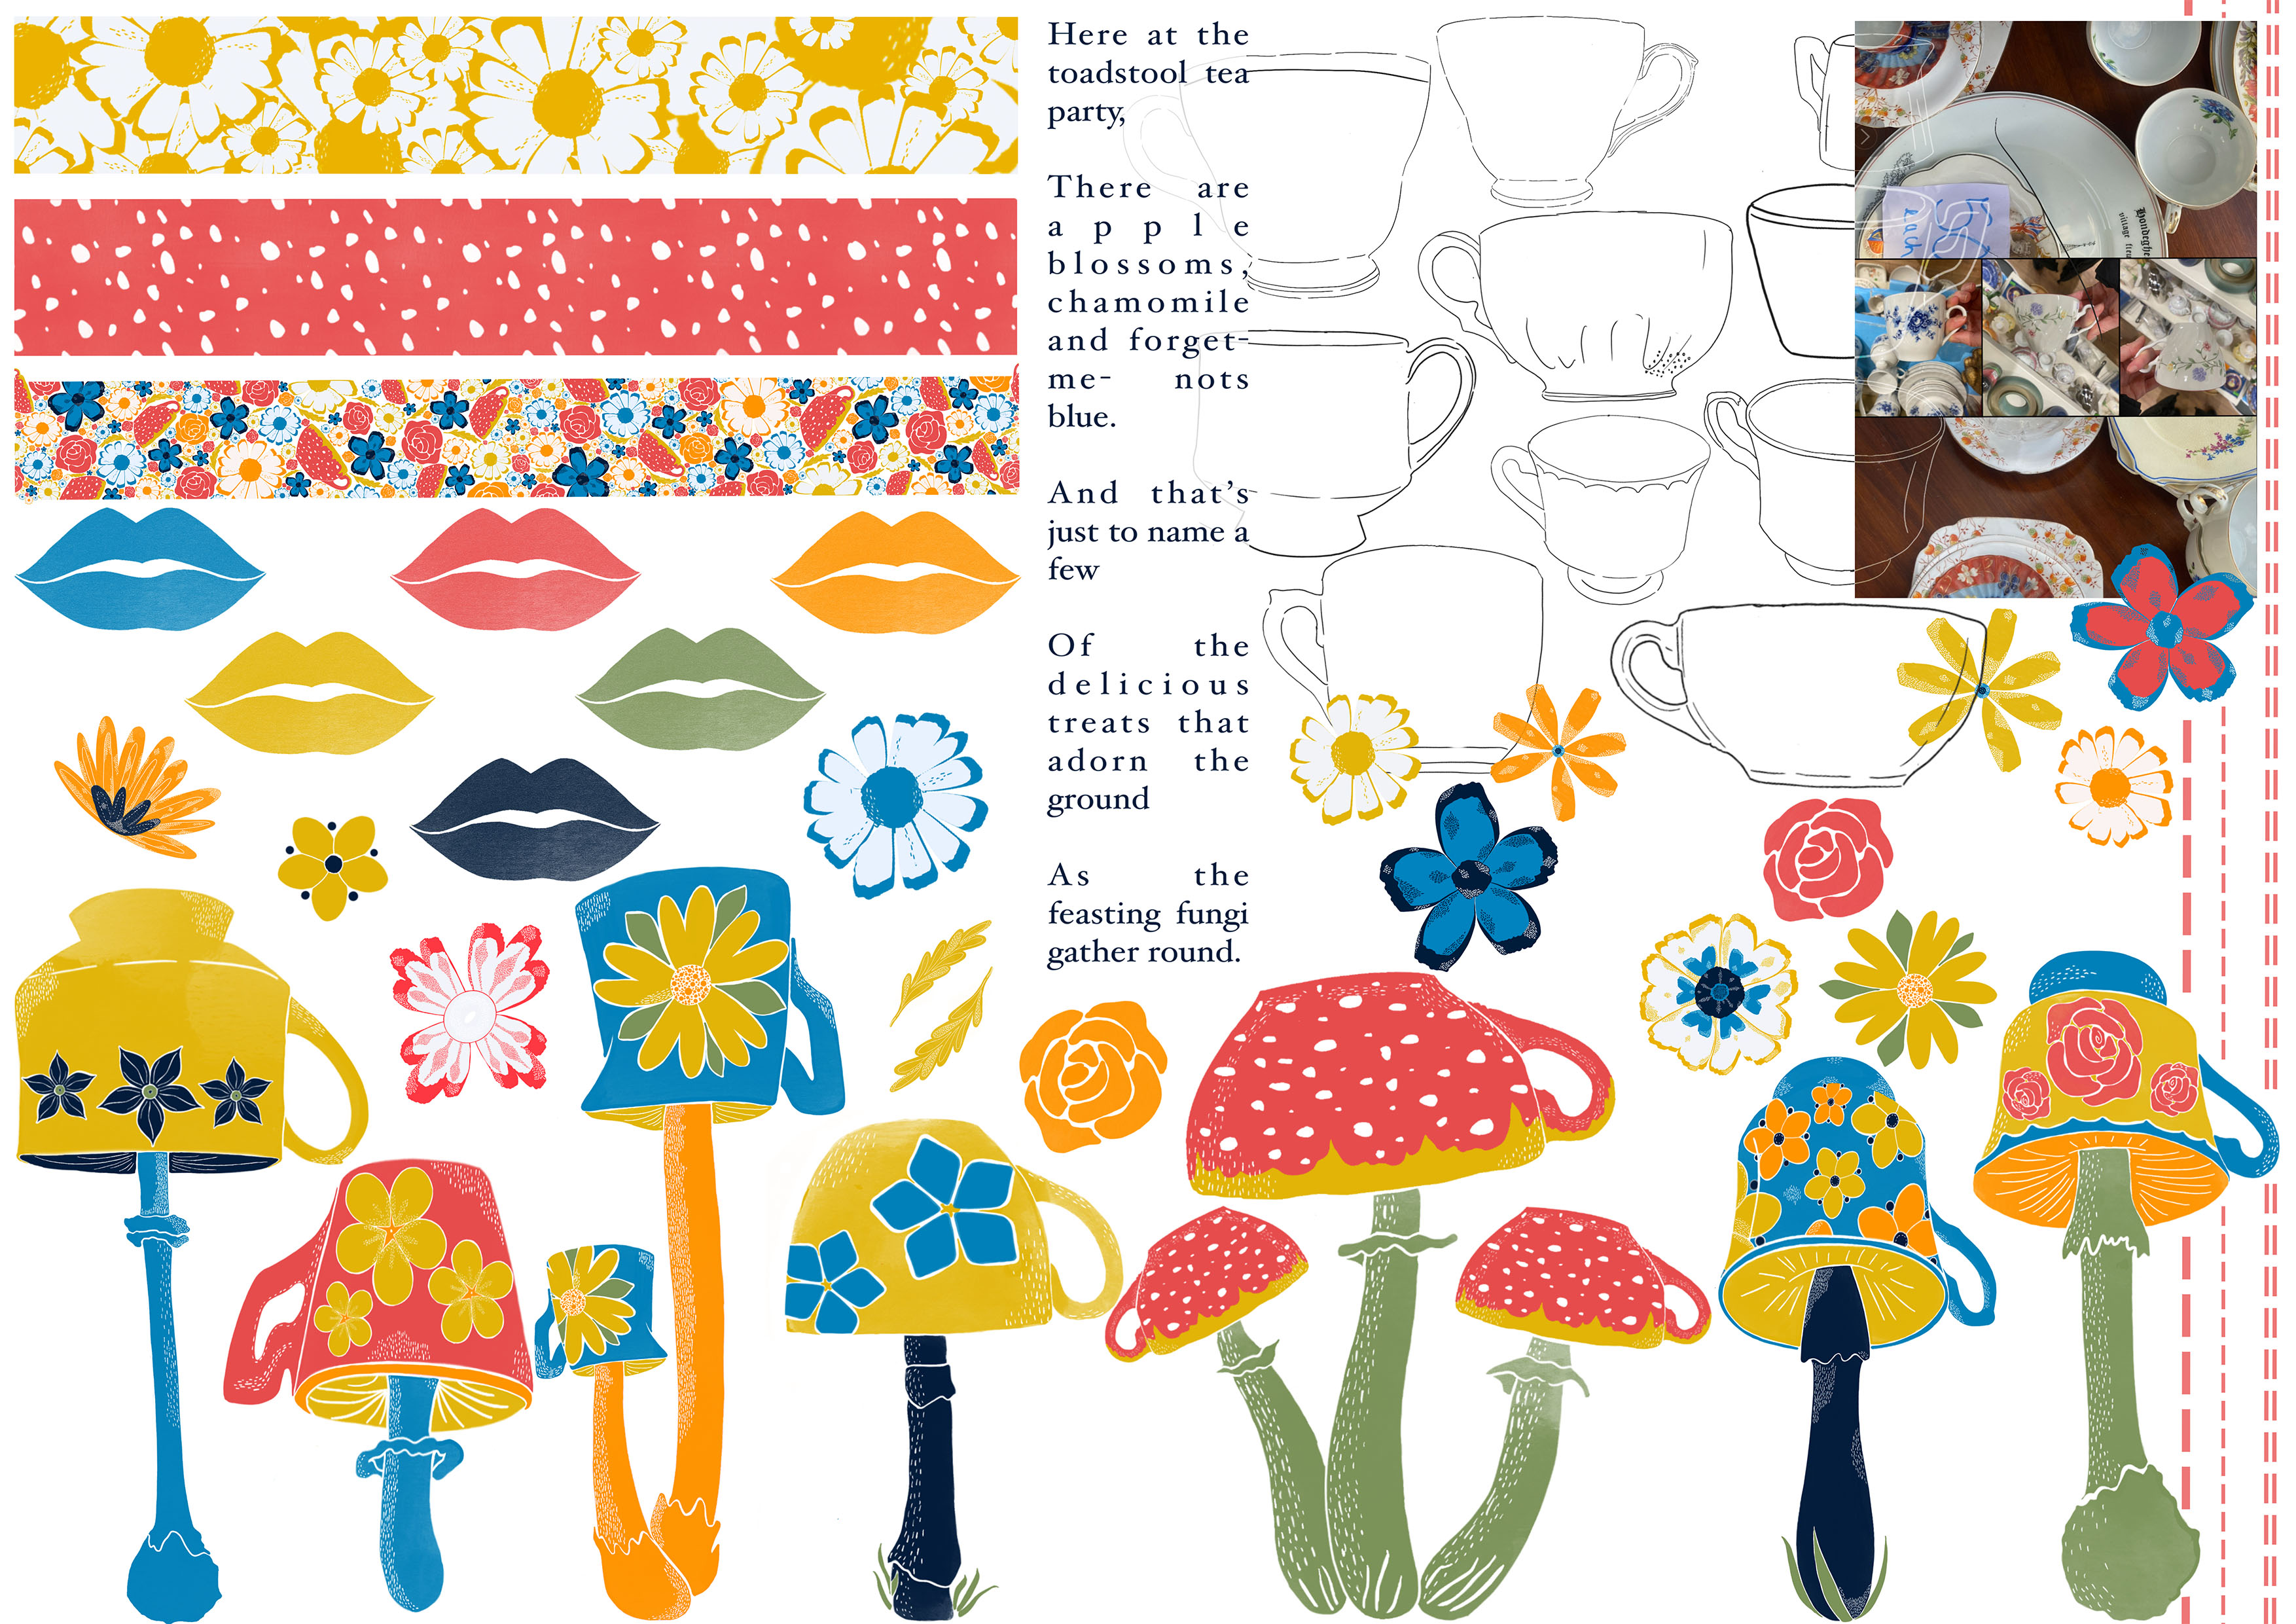 A portfolio board by Charlotte Standen for her collection toadstool tea party, featuring her initial drawings of bright florals, teacups, mushrooms and lips and a poem she wrote to accompany her work.